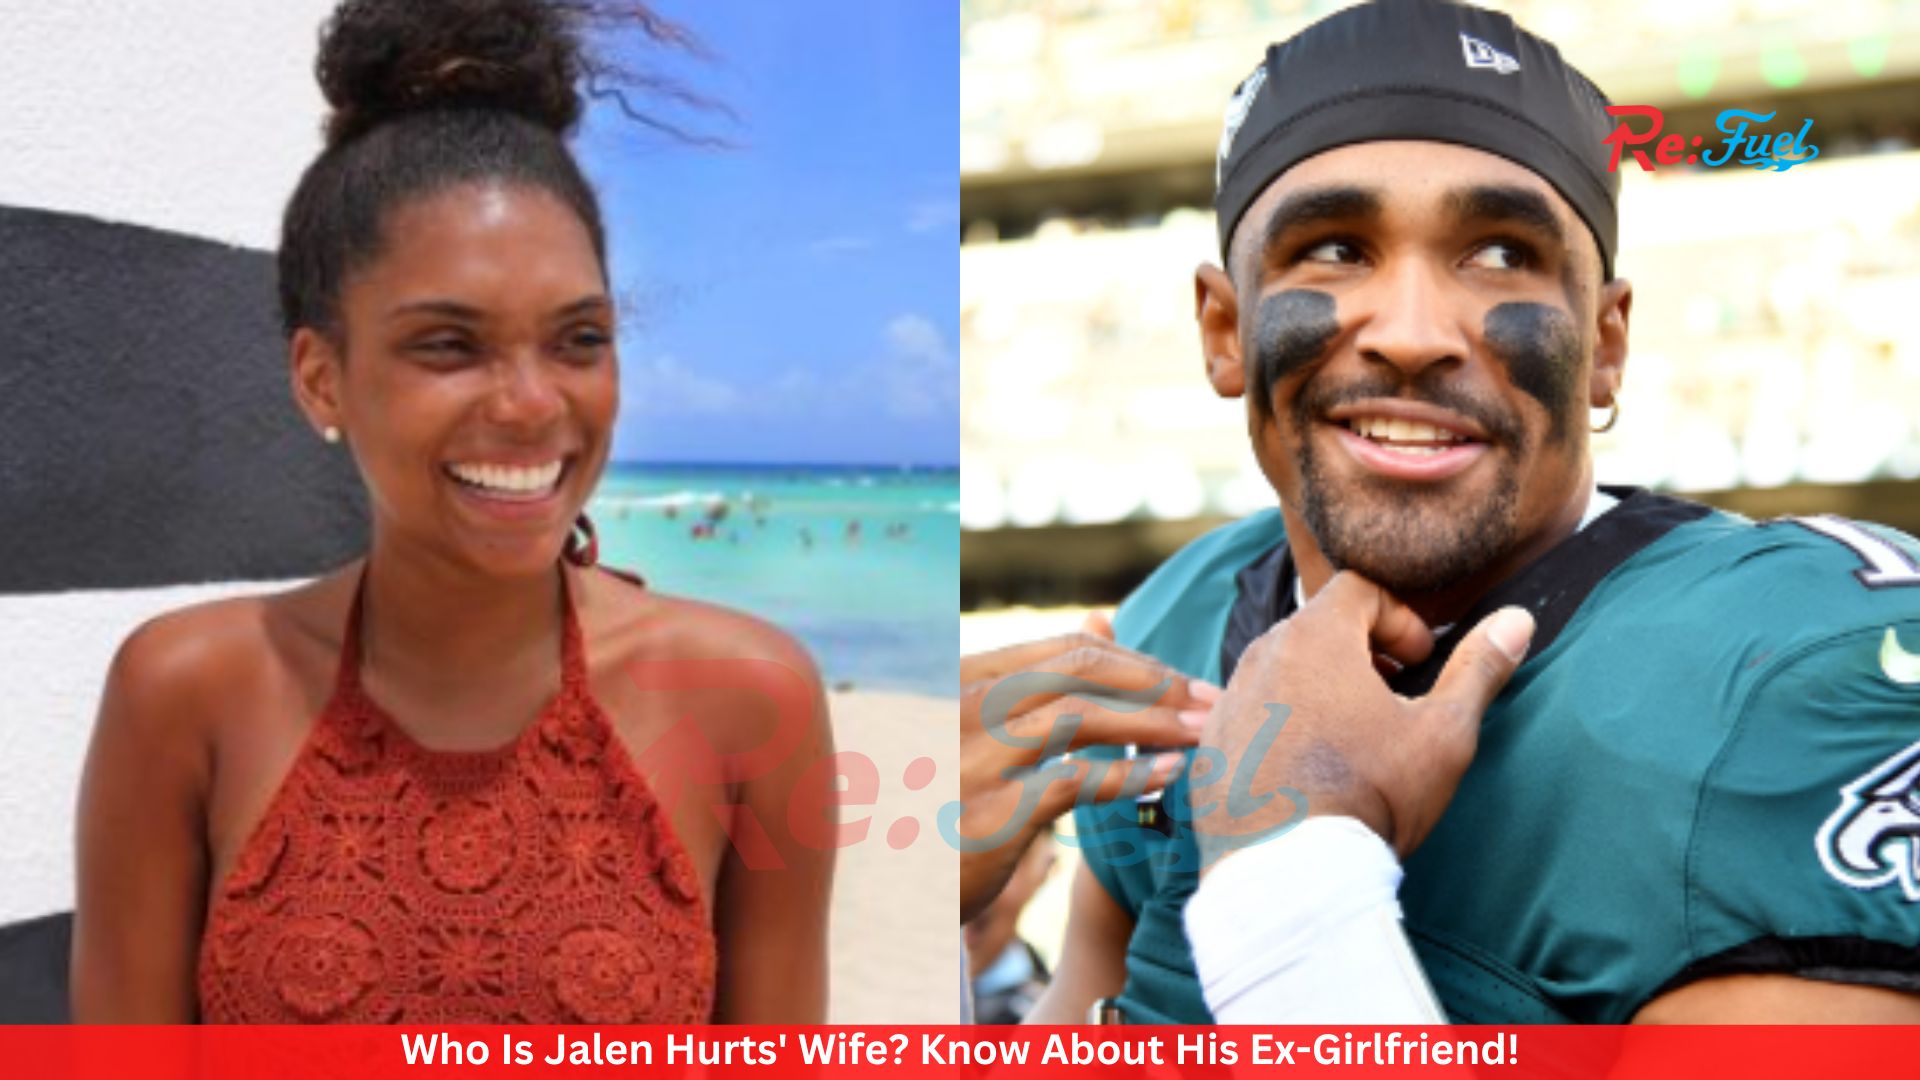 Who Is Jalen Hurts' Wife? Know About His Ex-Girlfriend!